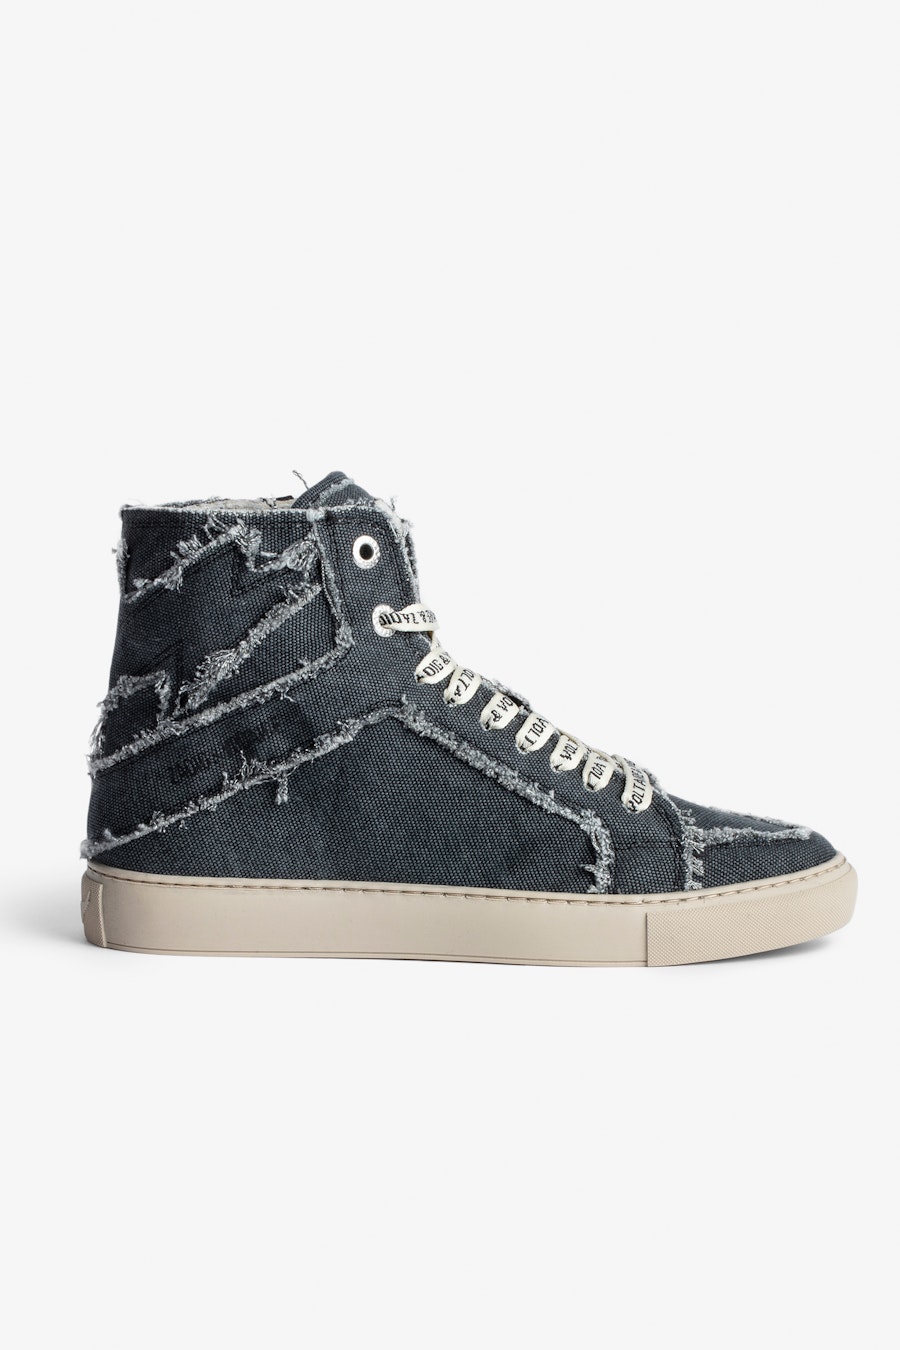 ZADIG&VOLTAIRE ZV1747 High Flash Canvas Sneakers